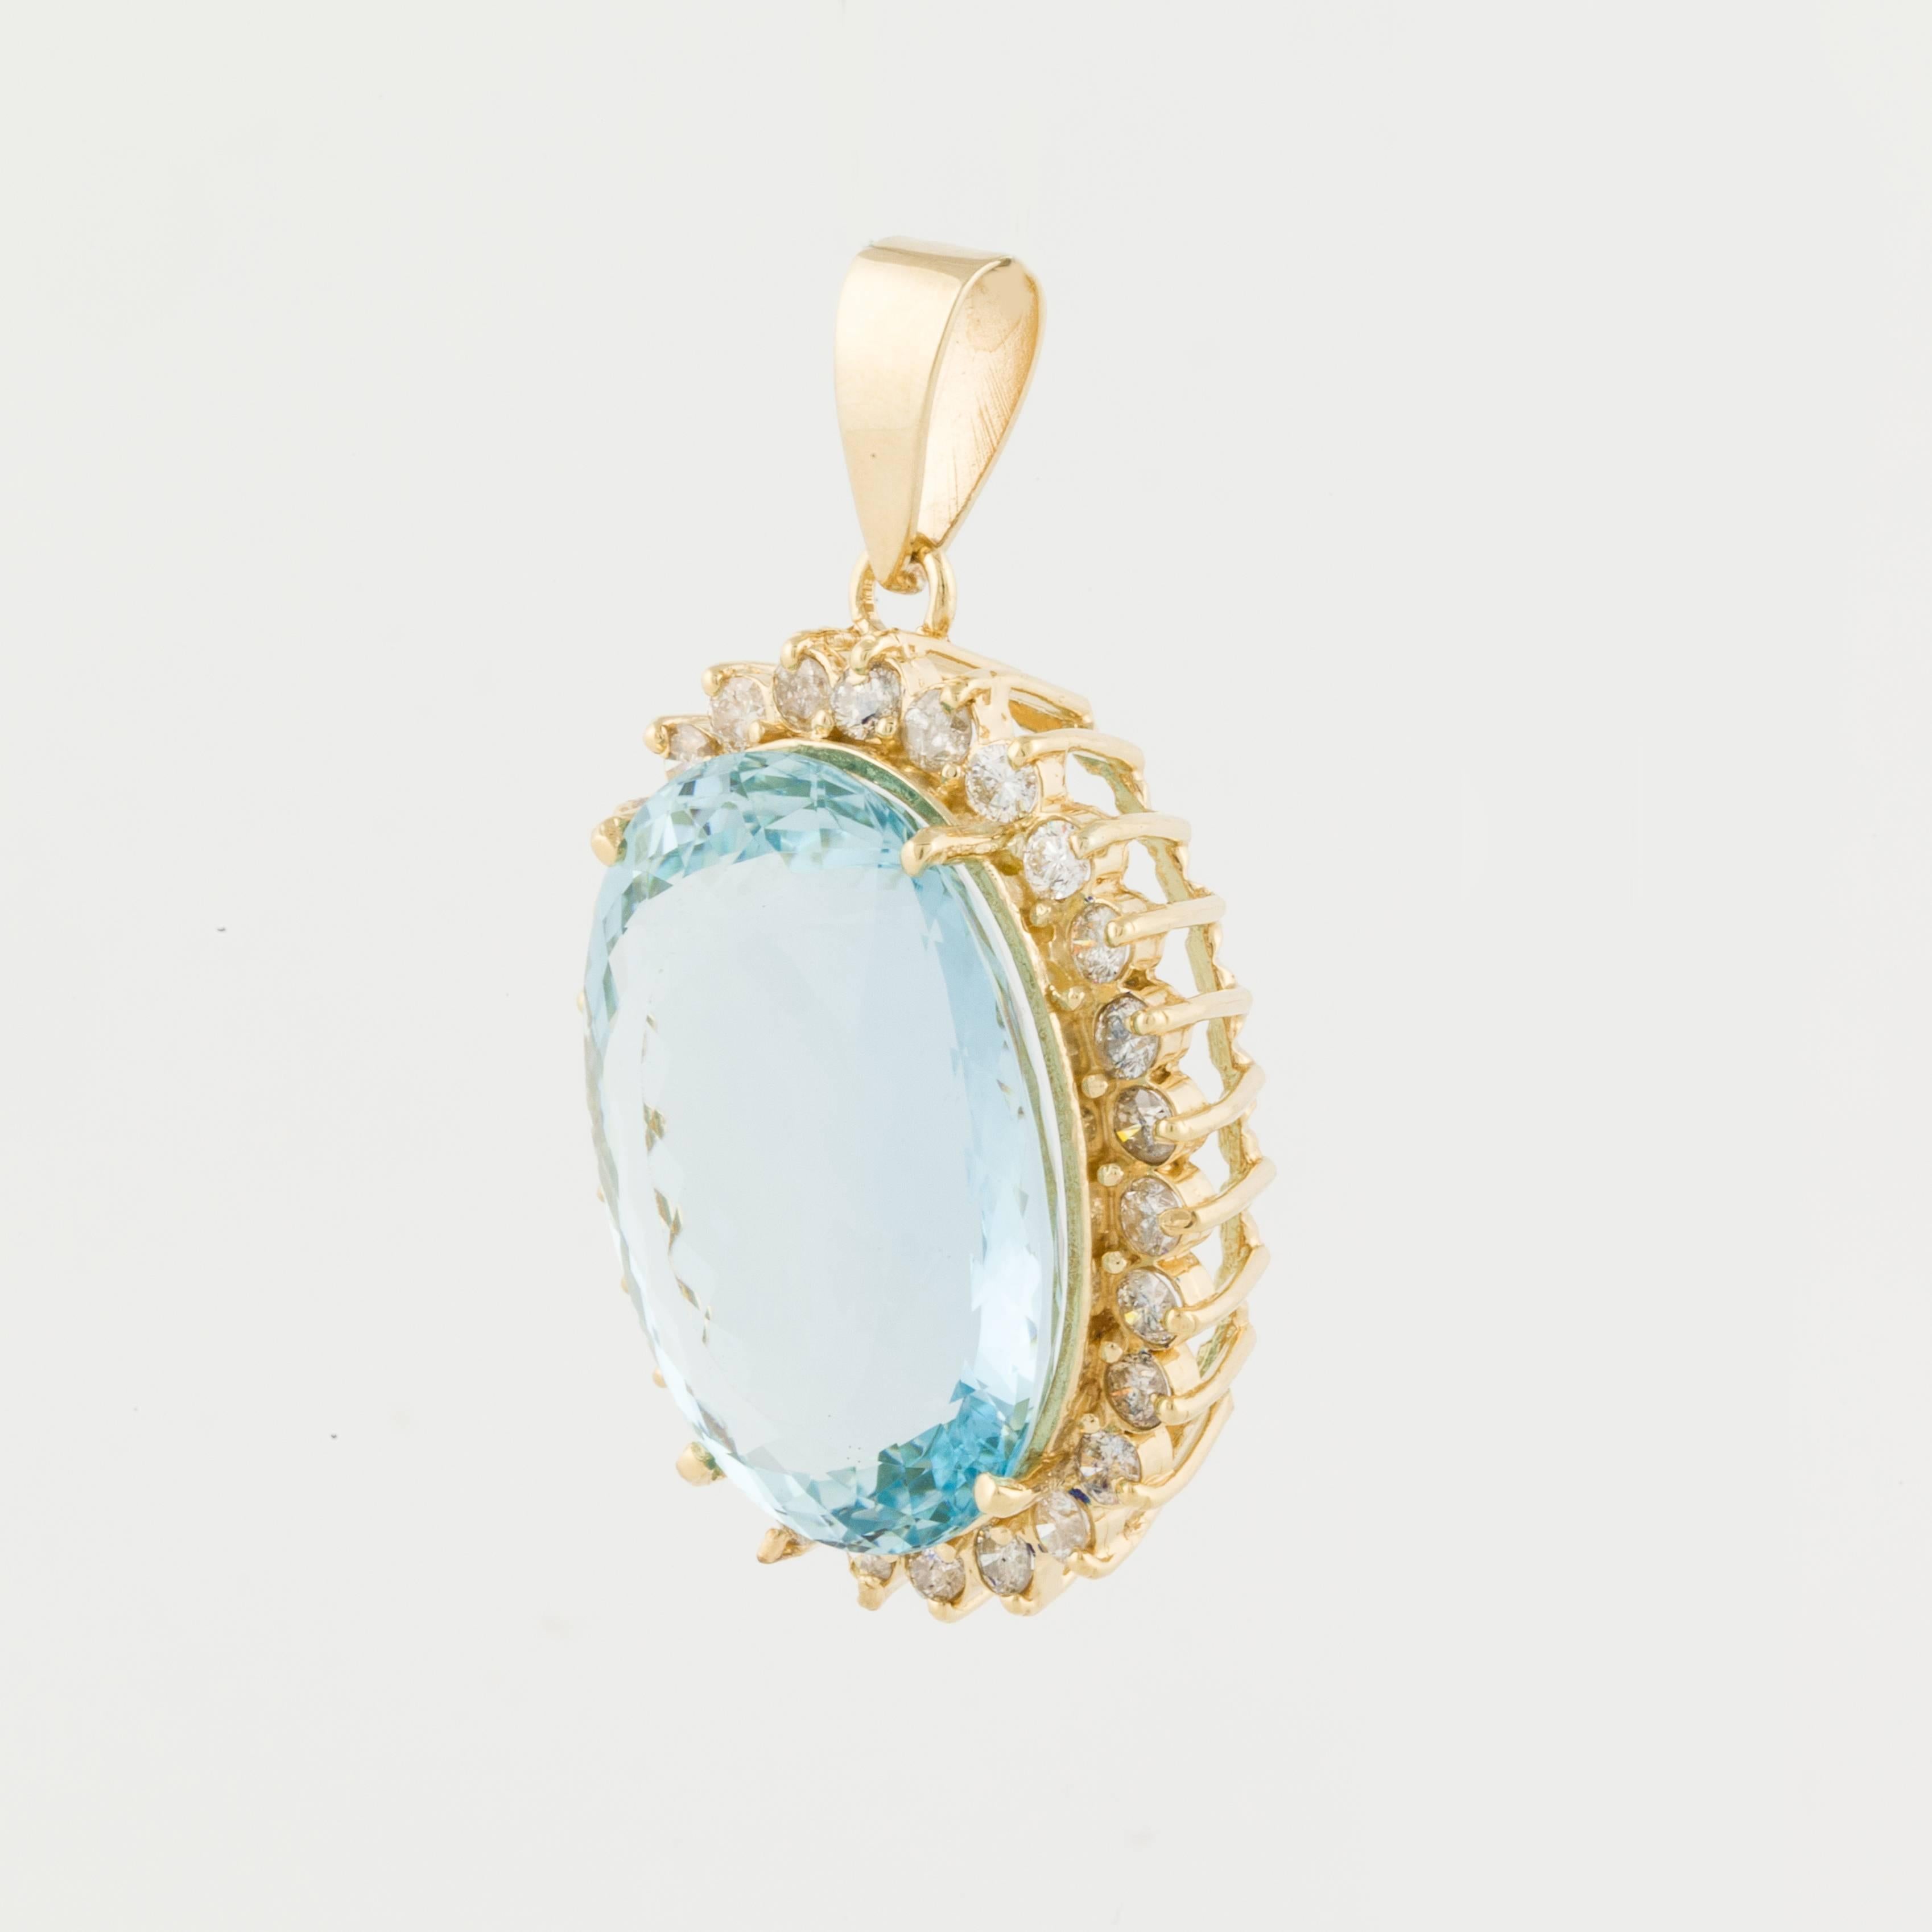 Pendant in 18K yellow gold featuring a large 52.93 carat aquamarine framed by round diamonds. There are 27 round diamonds that total 2.20 carats,  G-I color and SI-1 clarity.  The pendant measures 1 1/2 inches long and 1 1/8 inches wide.  